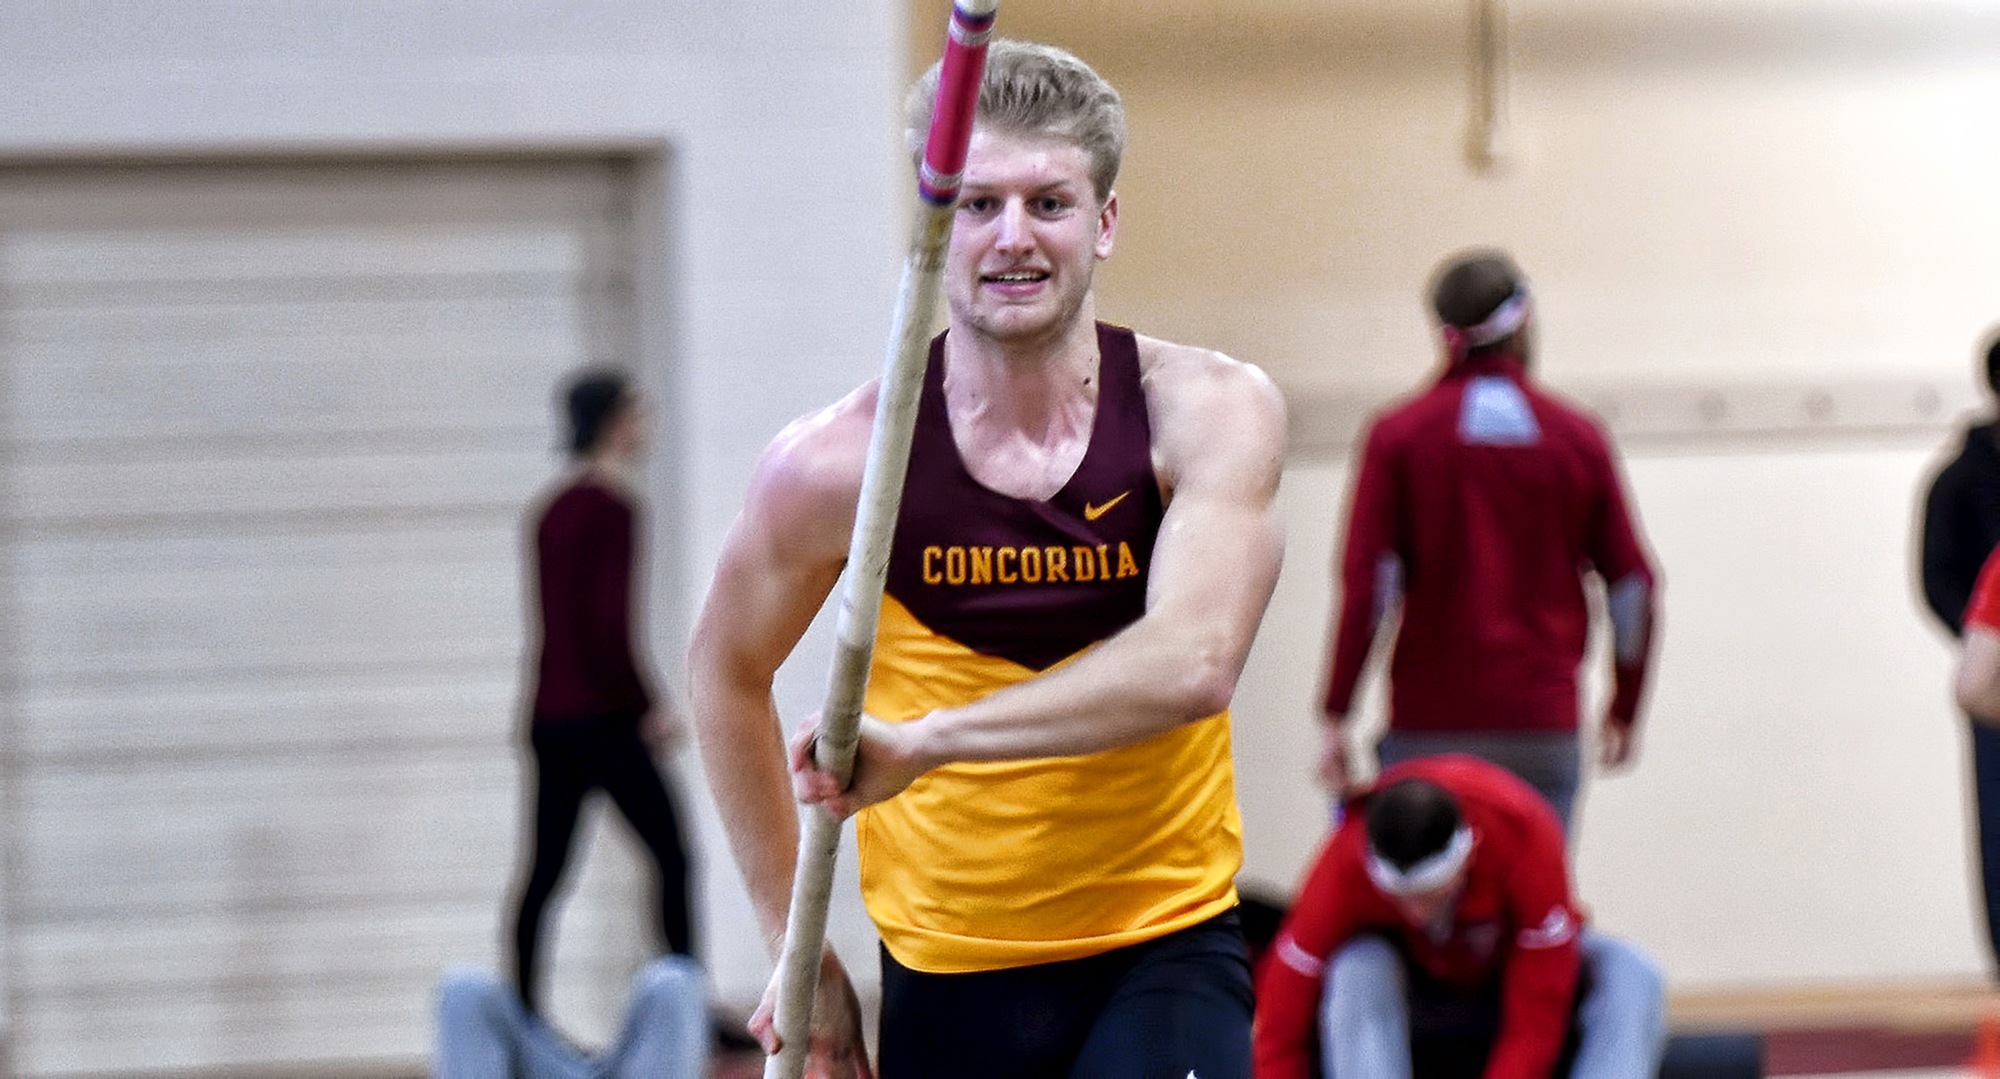 Junior Matt Bye posted a career-high total in the heptathlon at the Bison Open and now leads the MIAC in the event this year and is 11th in all of Division III.